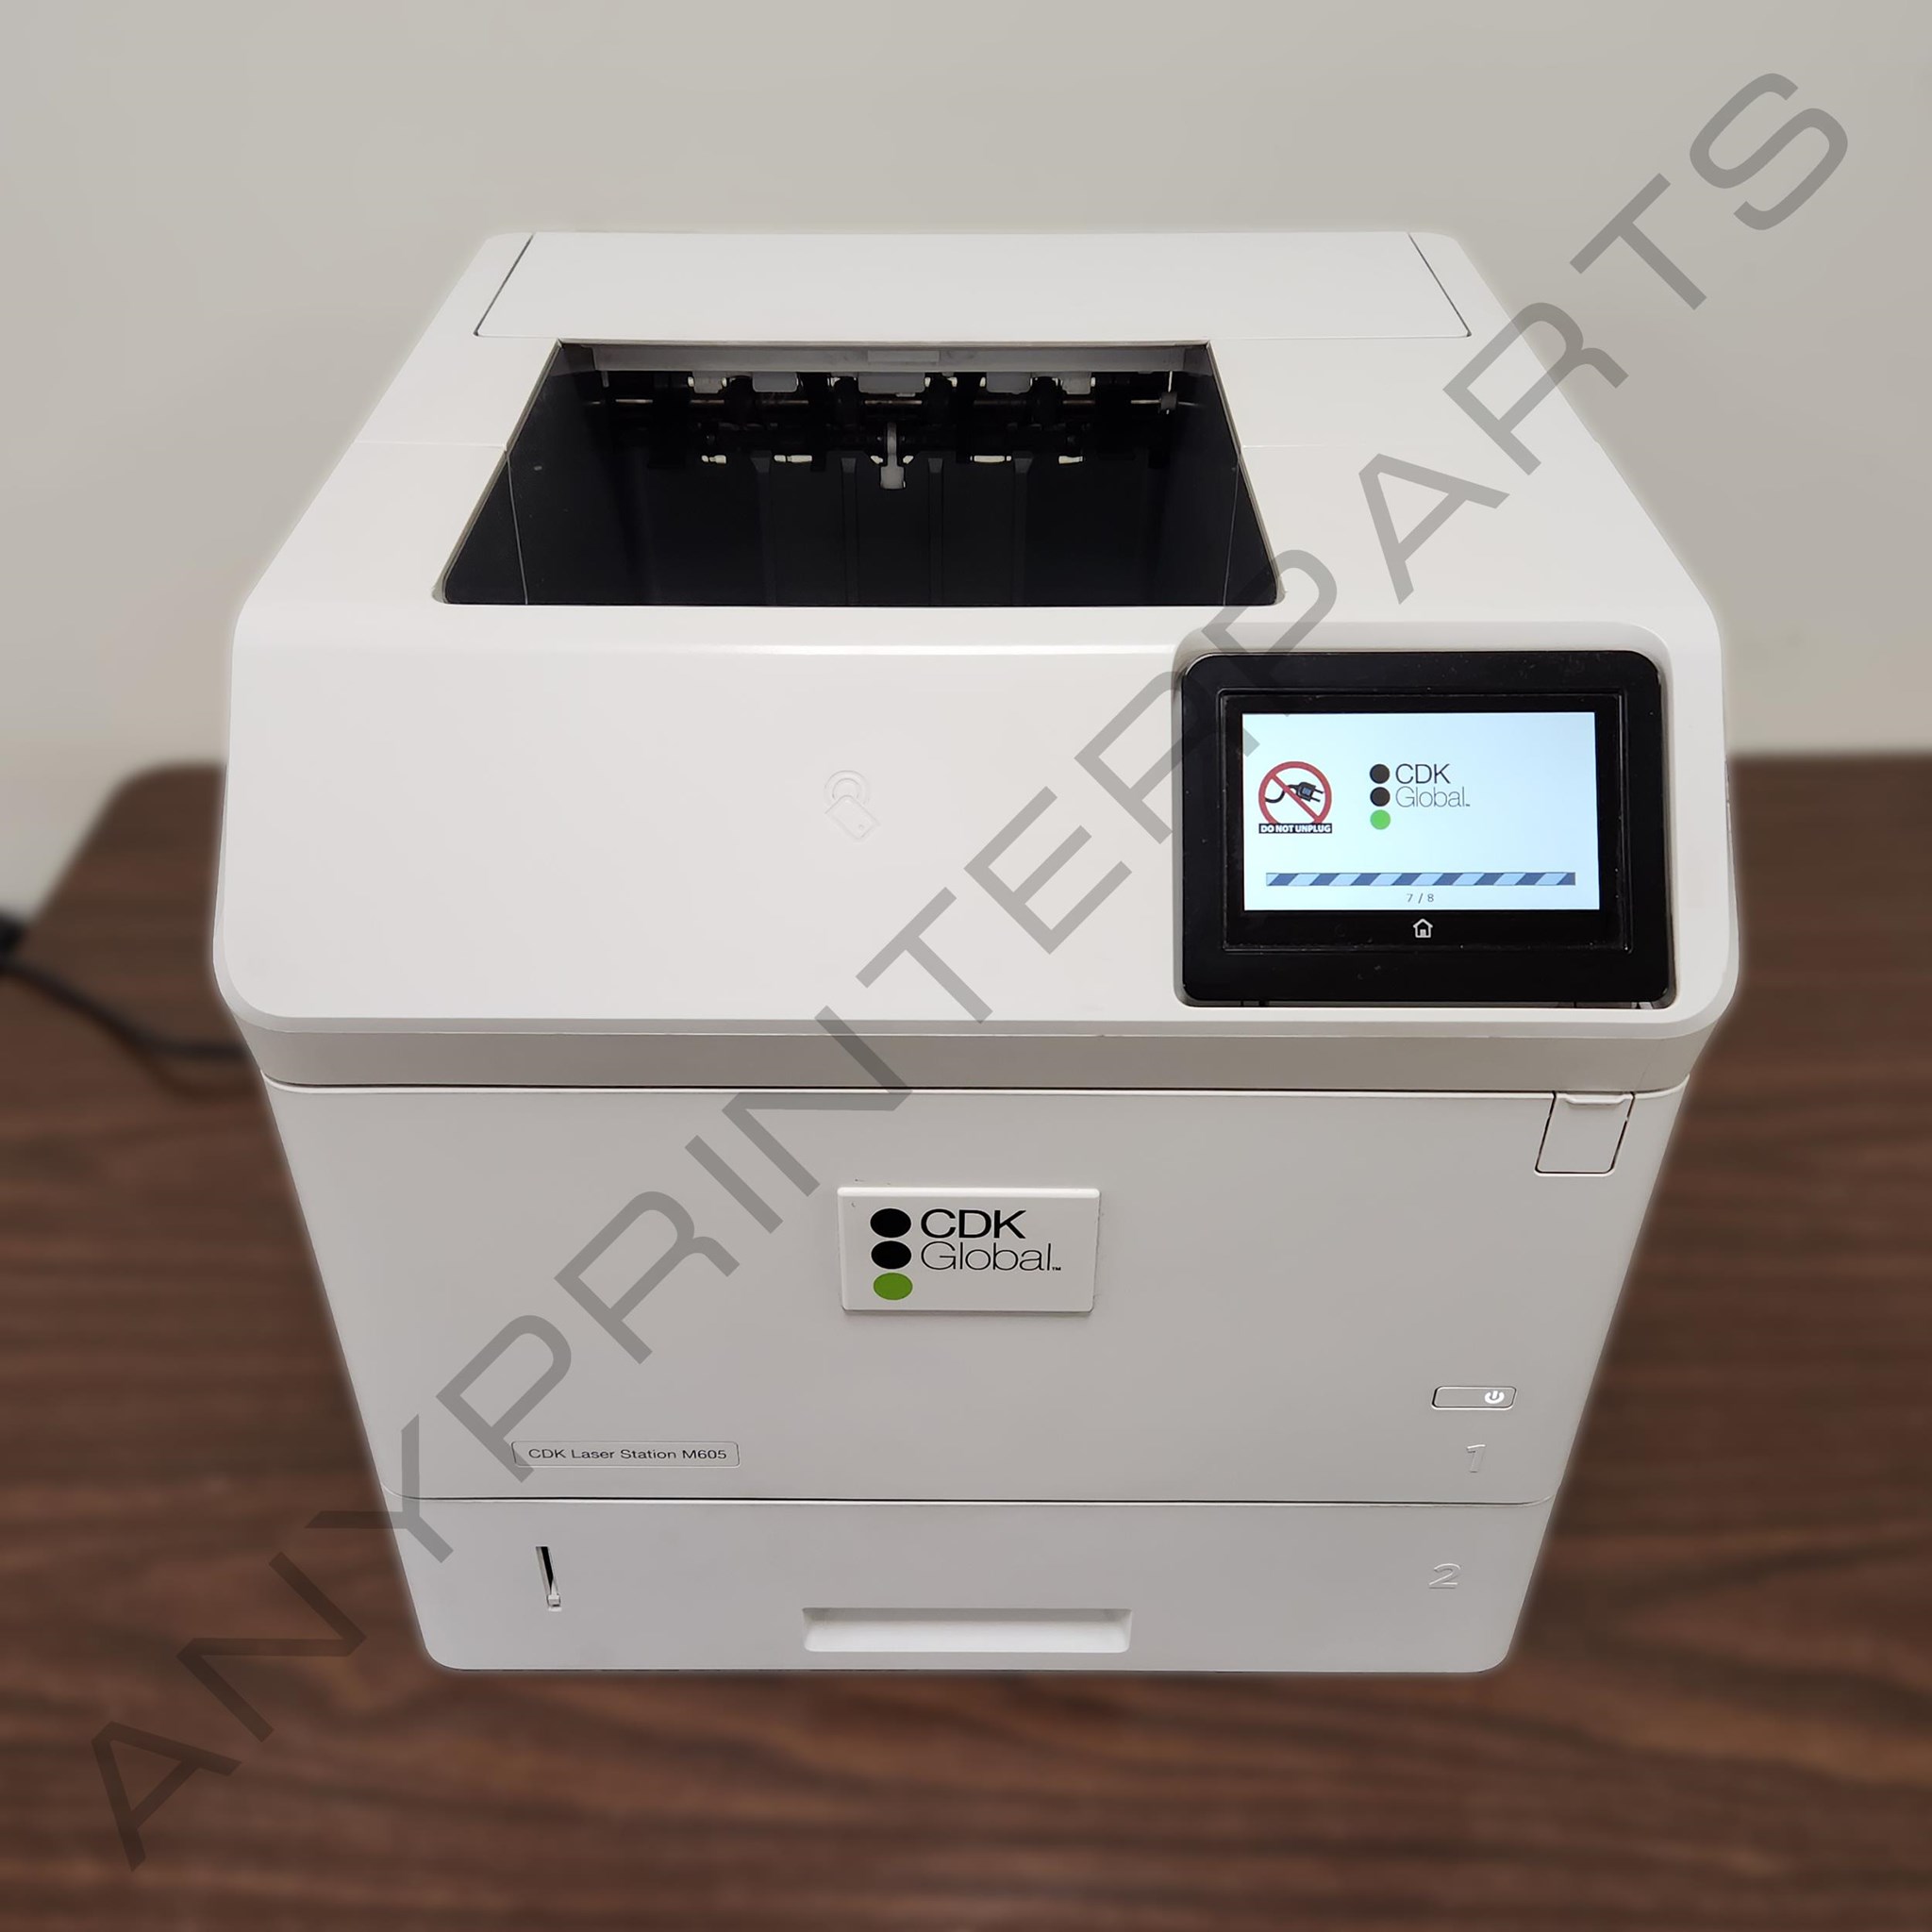 Picture of CDK Global Laser Station M605 (manufacturered by HP)